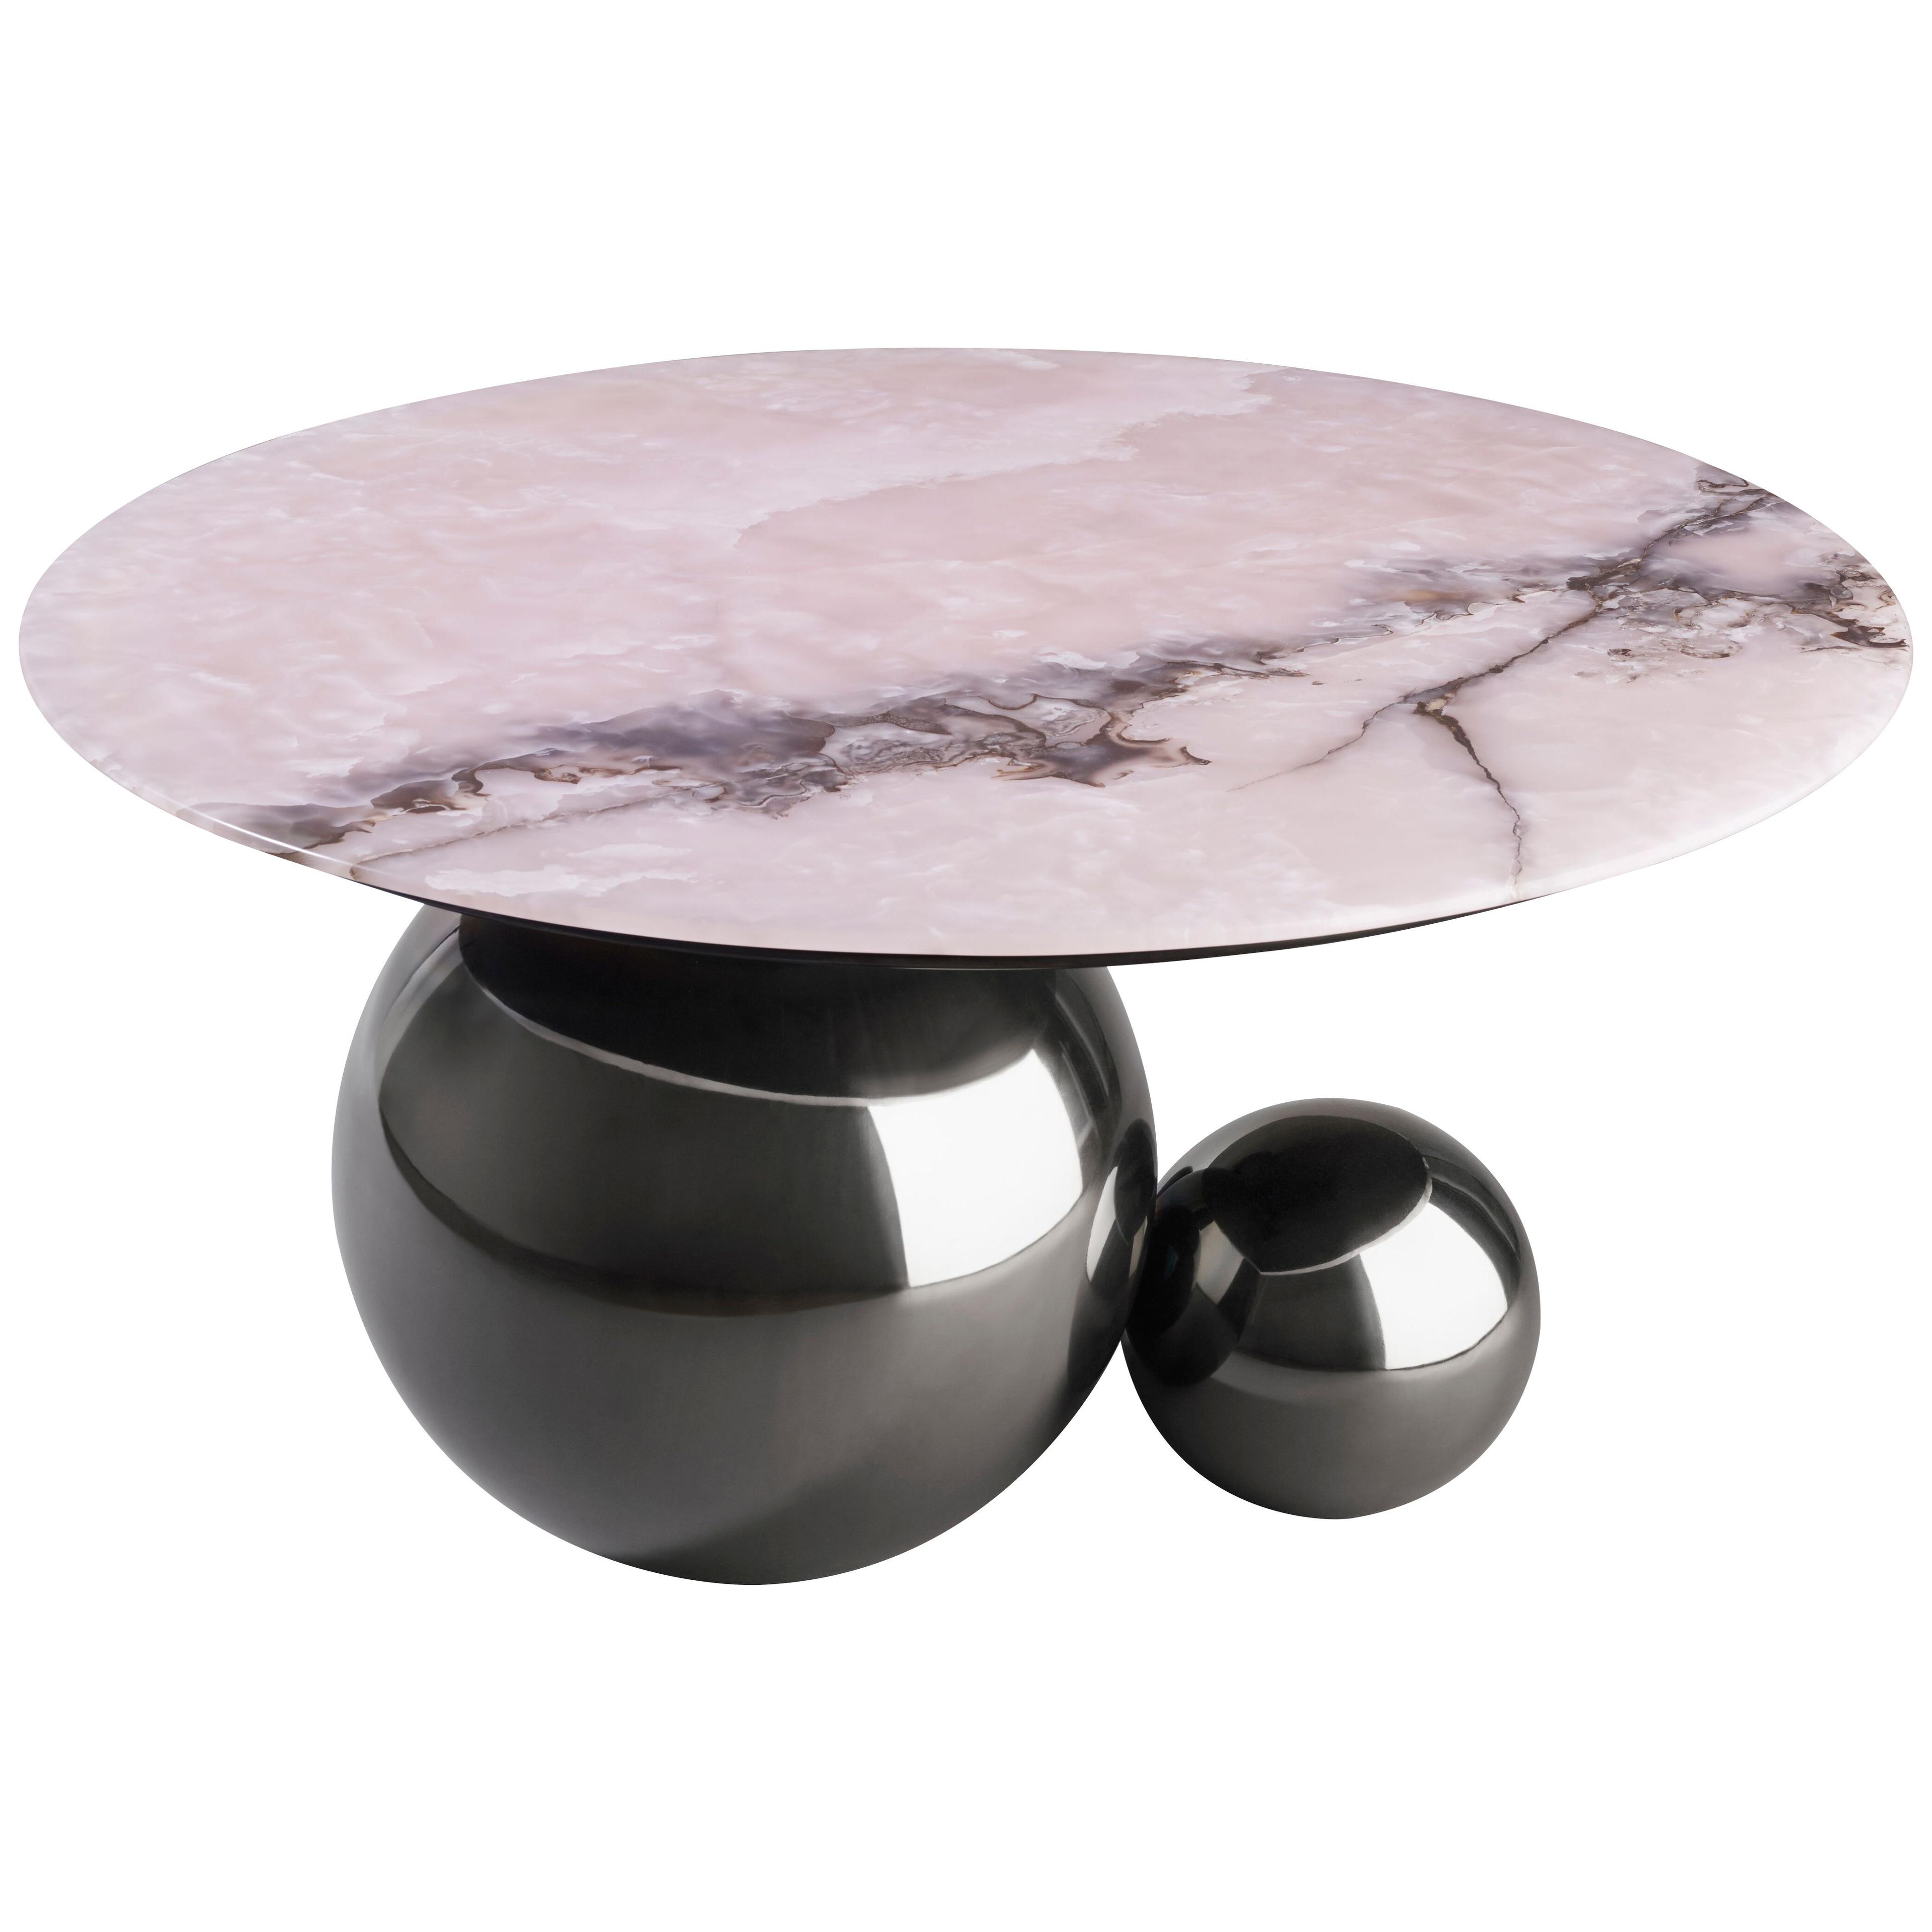 'JinShi' Coffee Table Featuring Pink Jade with a Gunmetal Grey Tinted Base 